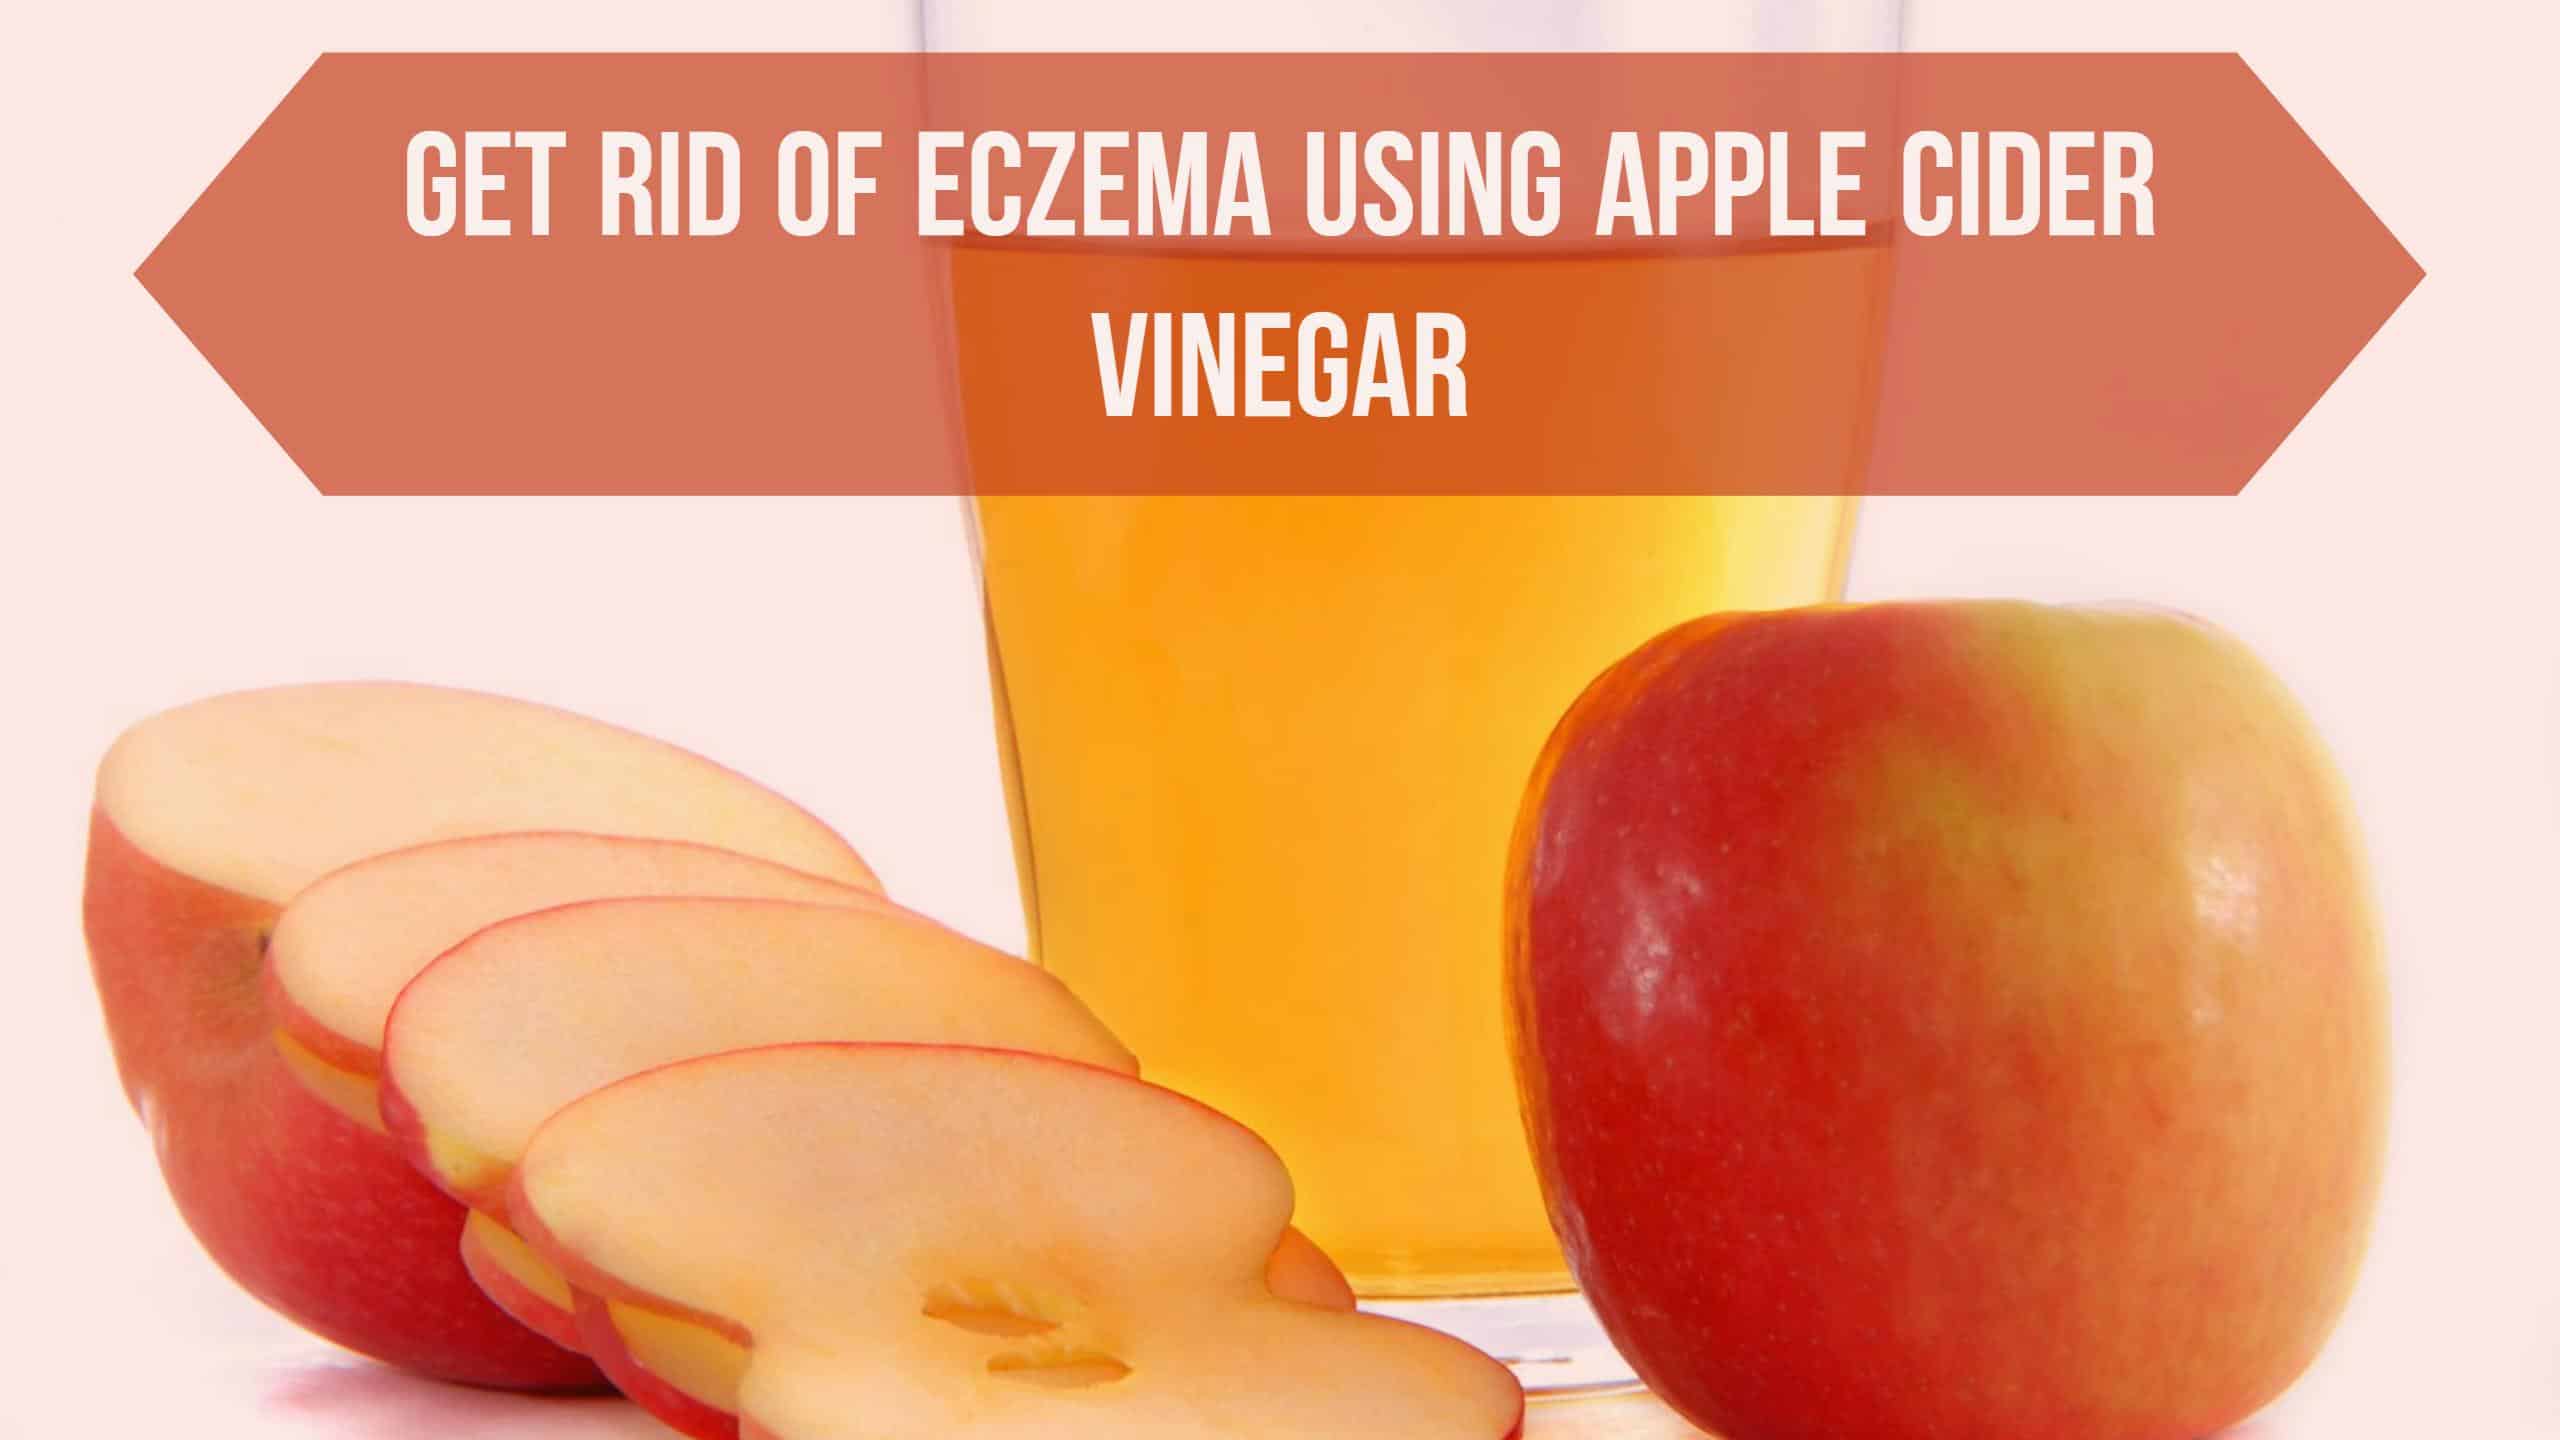 How to Get Rid of Eczema using Apple Cider Vinegar